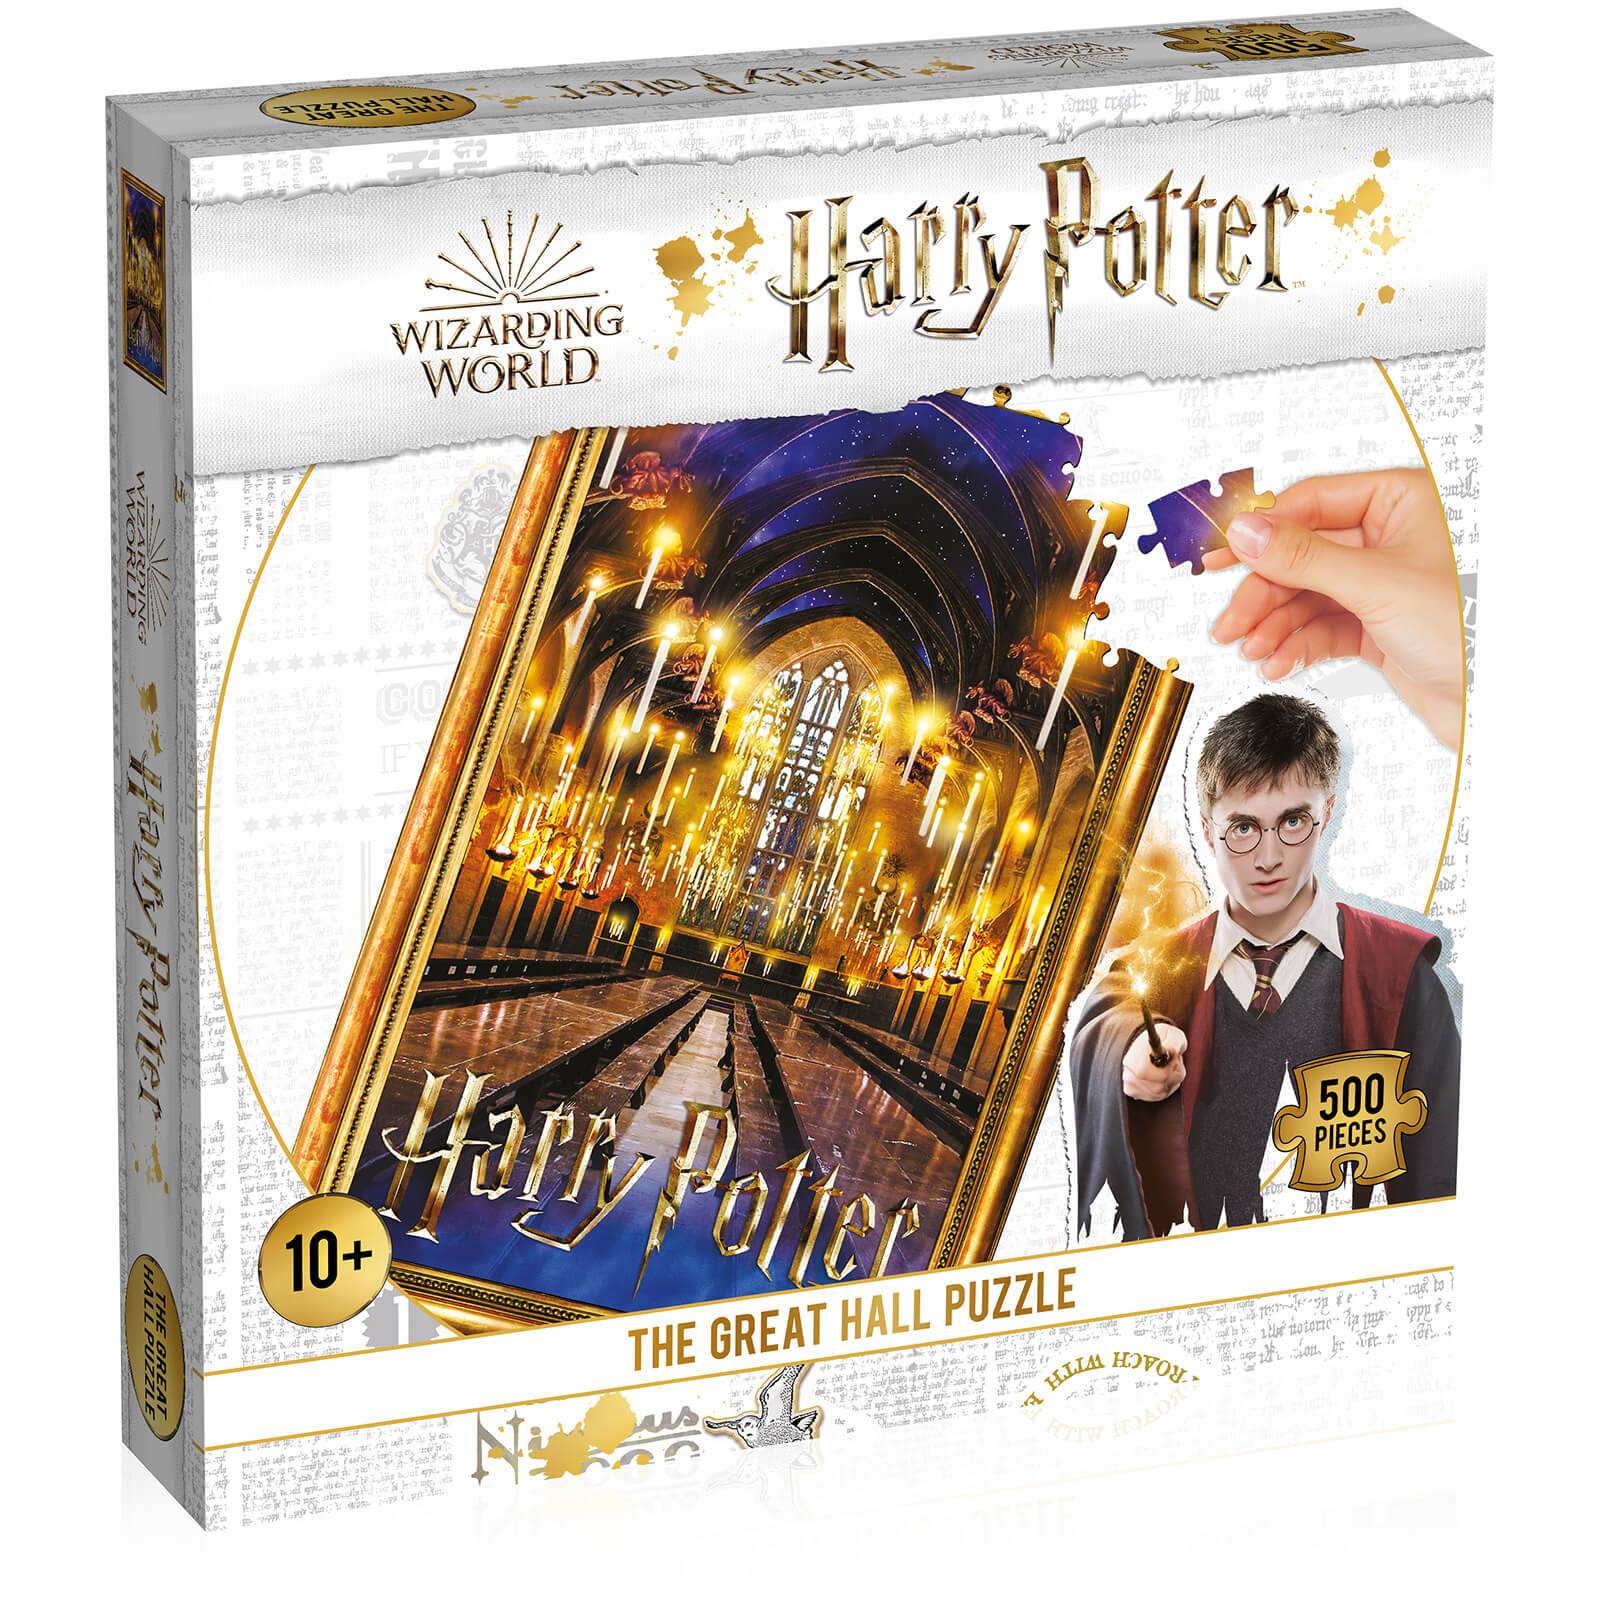 500 Piece Jigsaw Puzzle - Harry Potter The Great Hall Edition